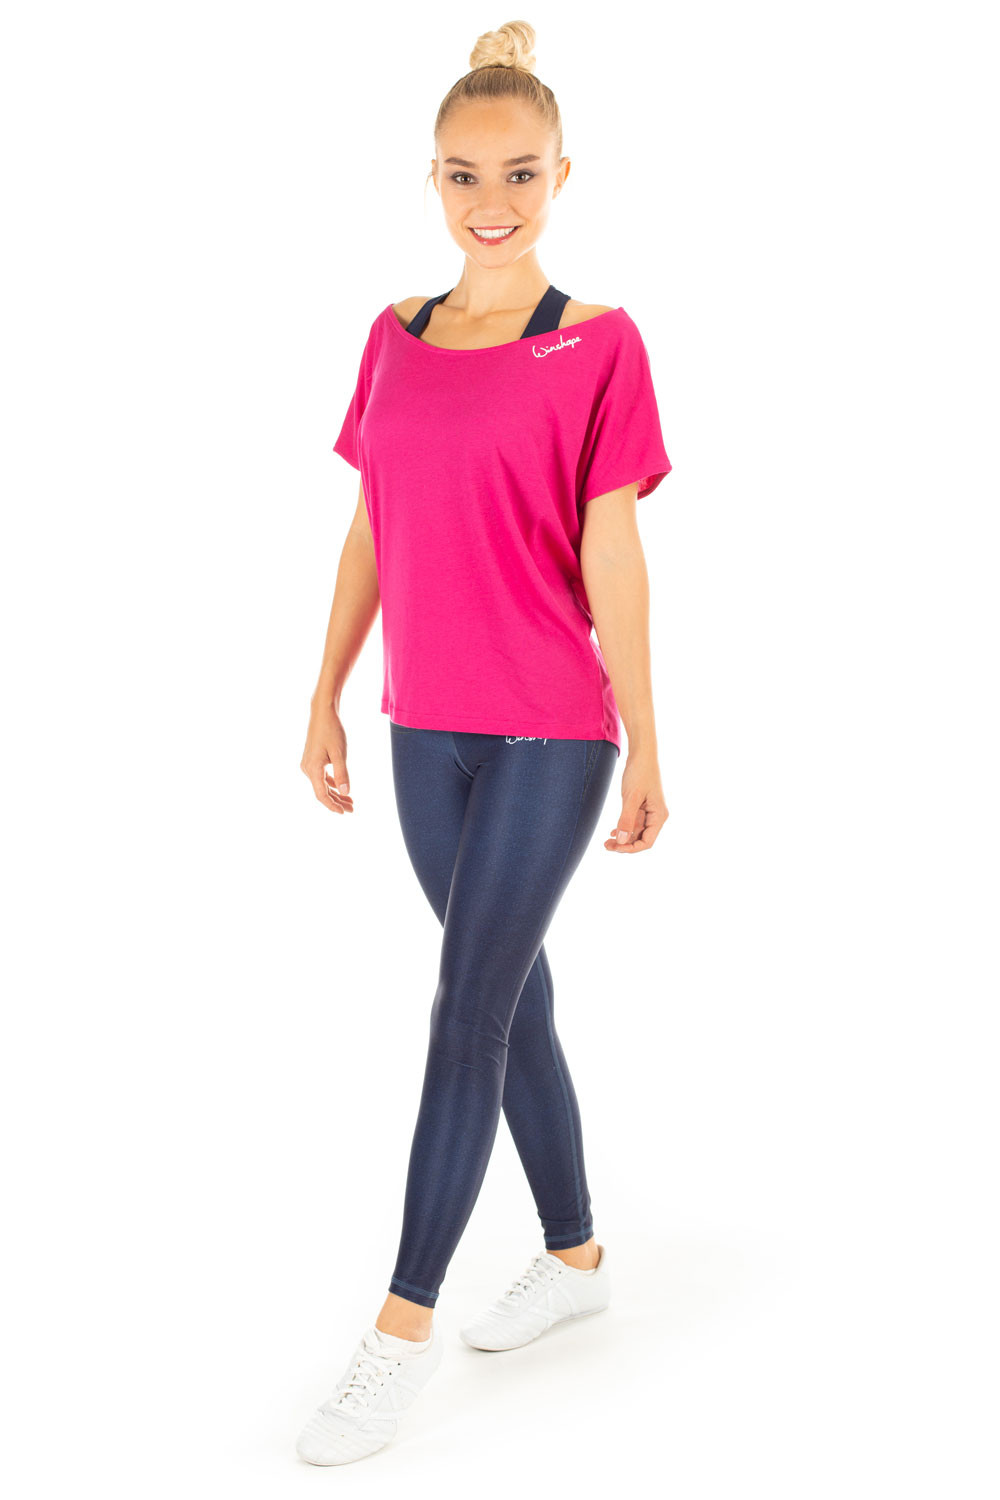 Functional Power Winshape blue, “Bootylicious”AEL102, Shape Jeans Style Slim Tights rich